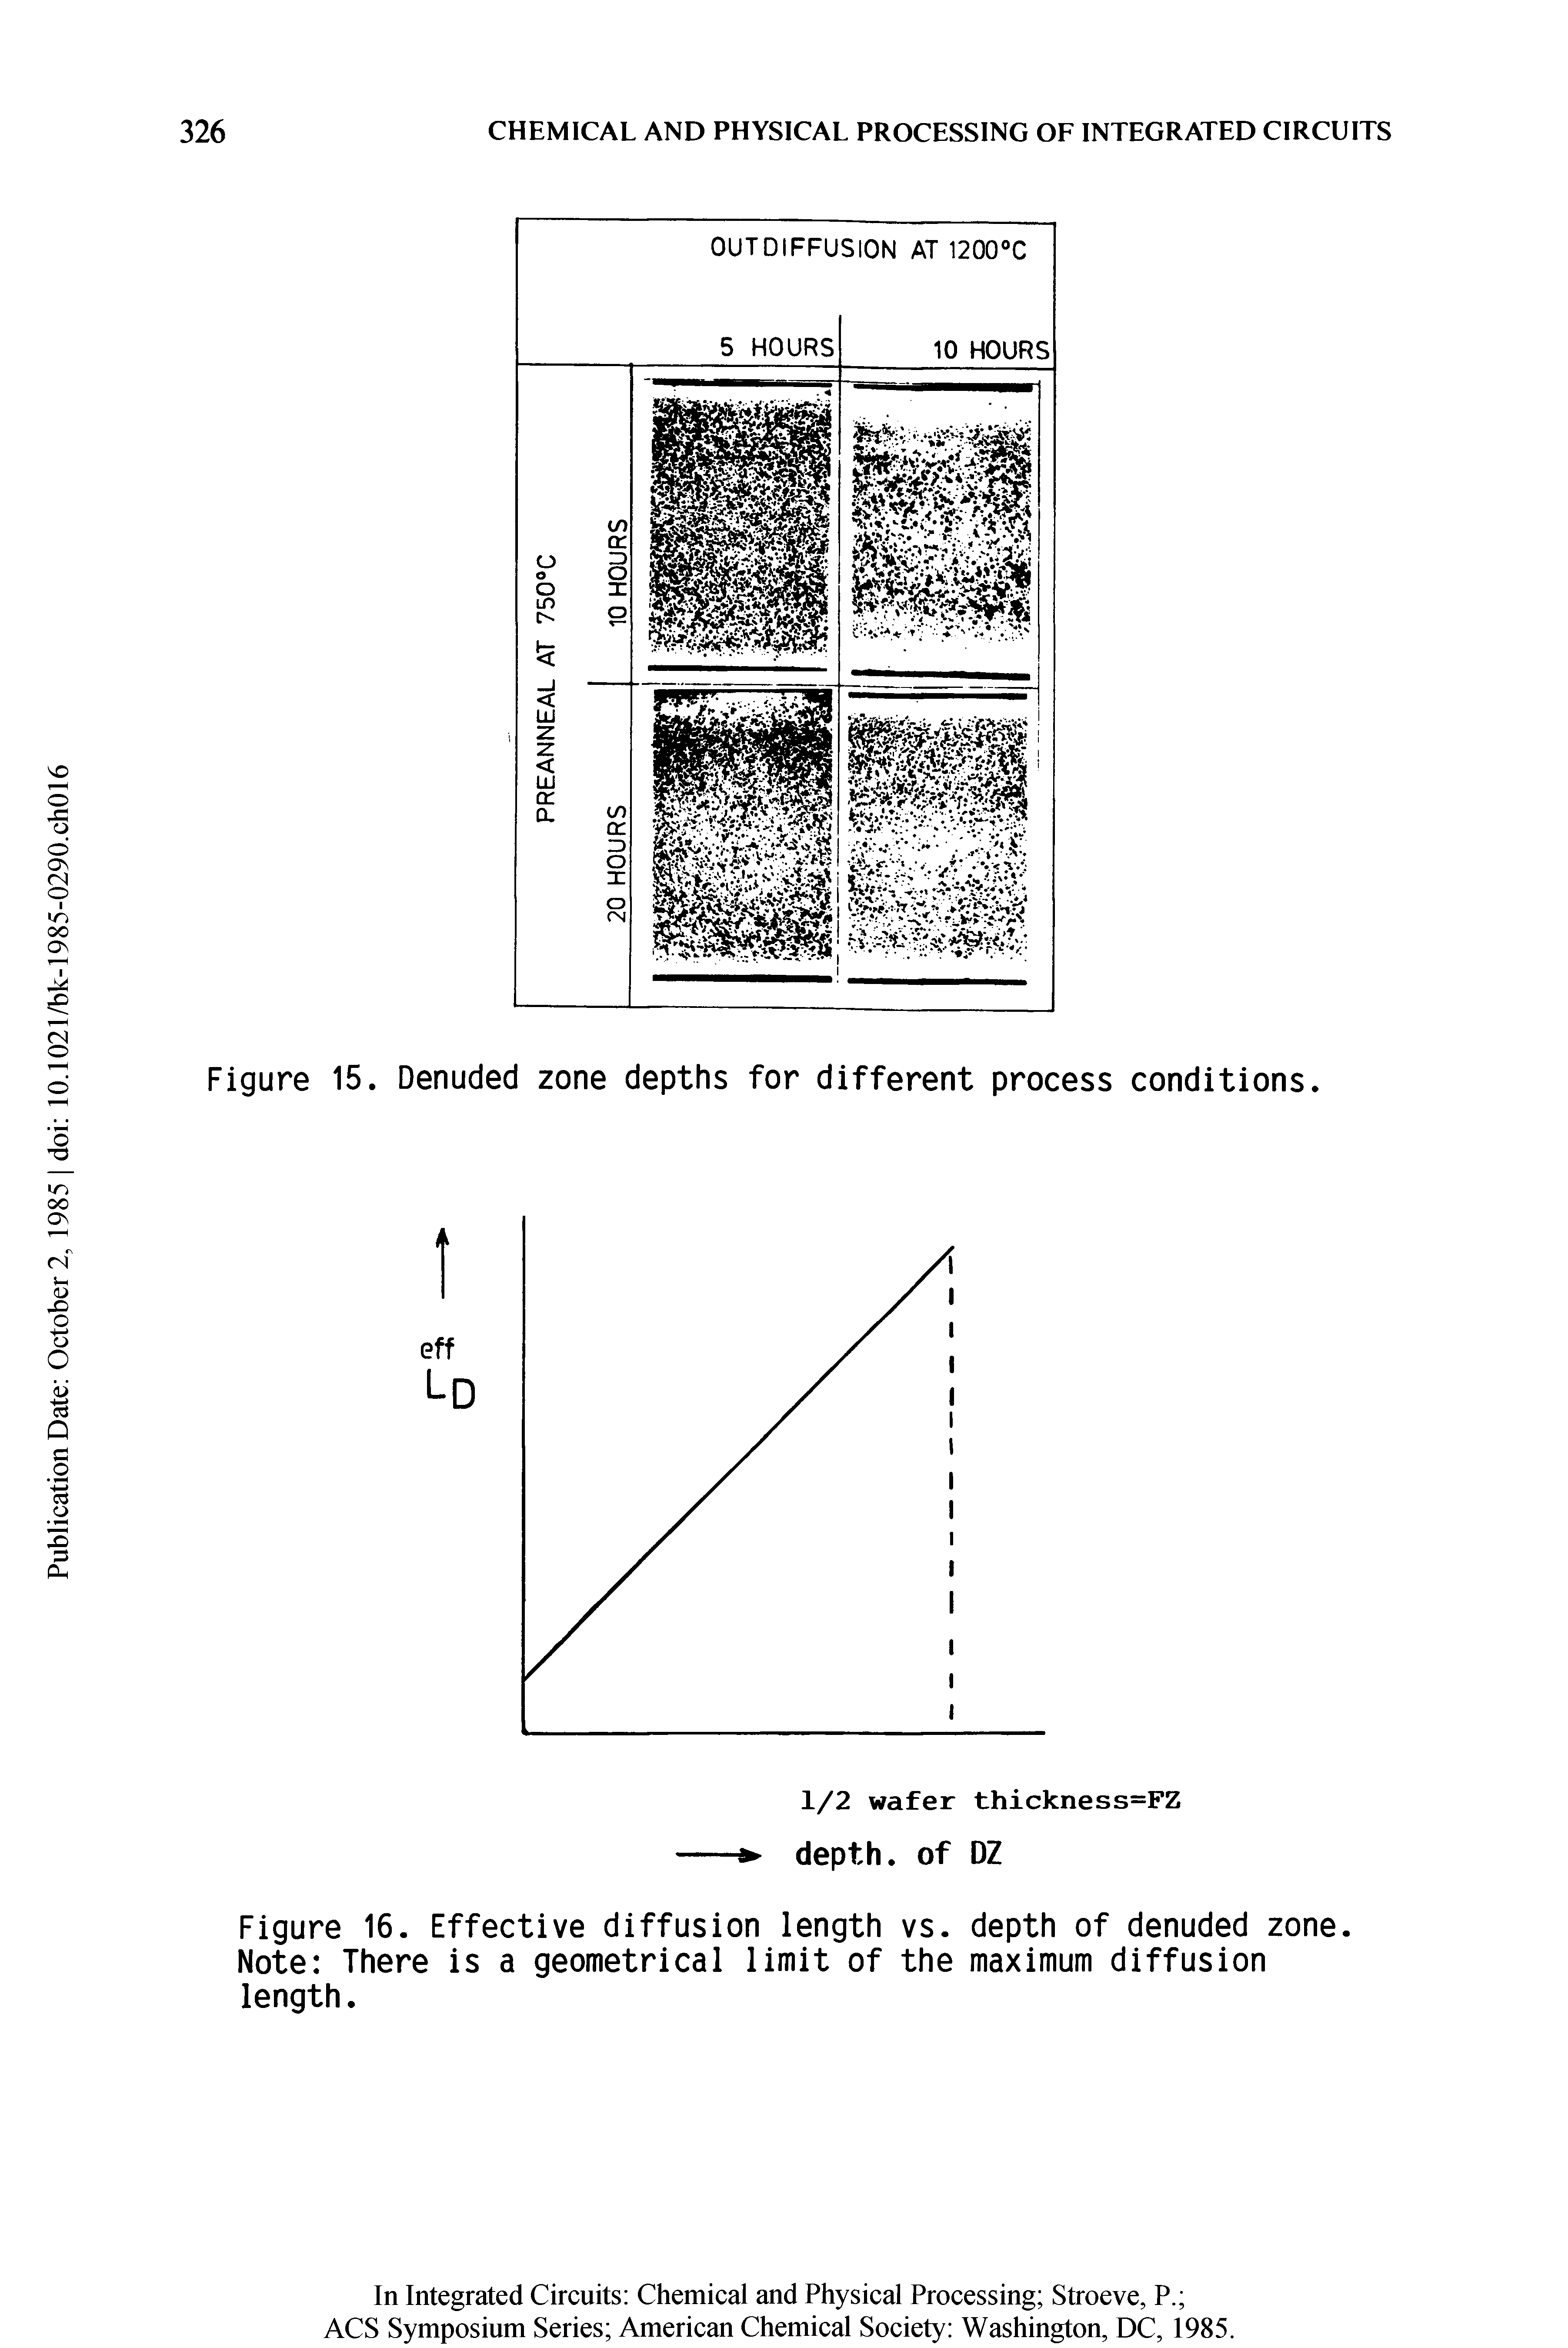 Figure 16. Effective diffusion length vs. depth of denuded zone. Note There is a geometrical limit of the maximum diffusion length.